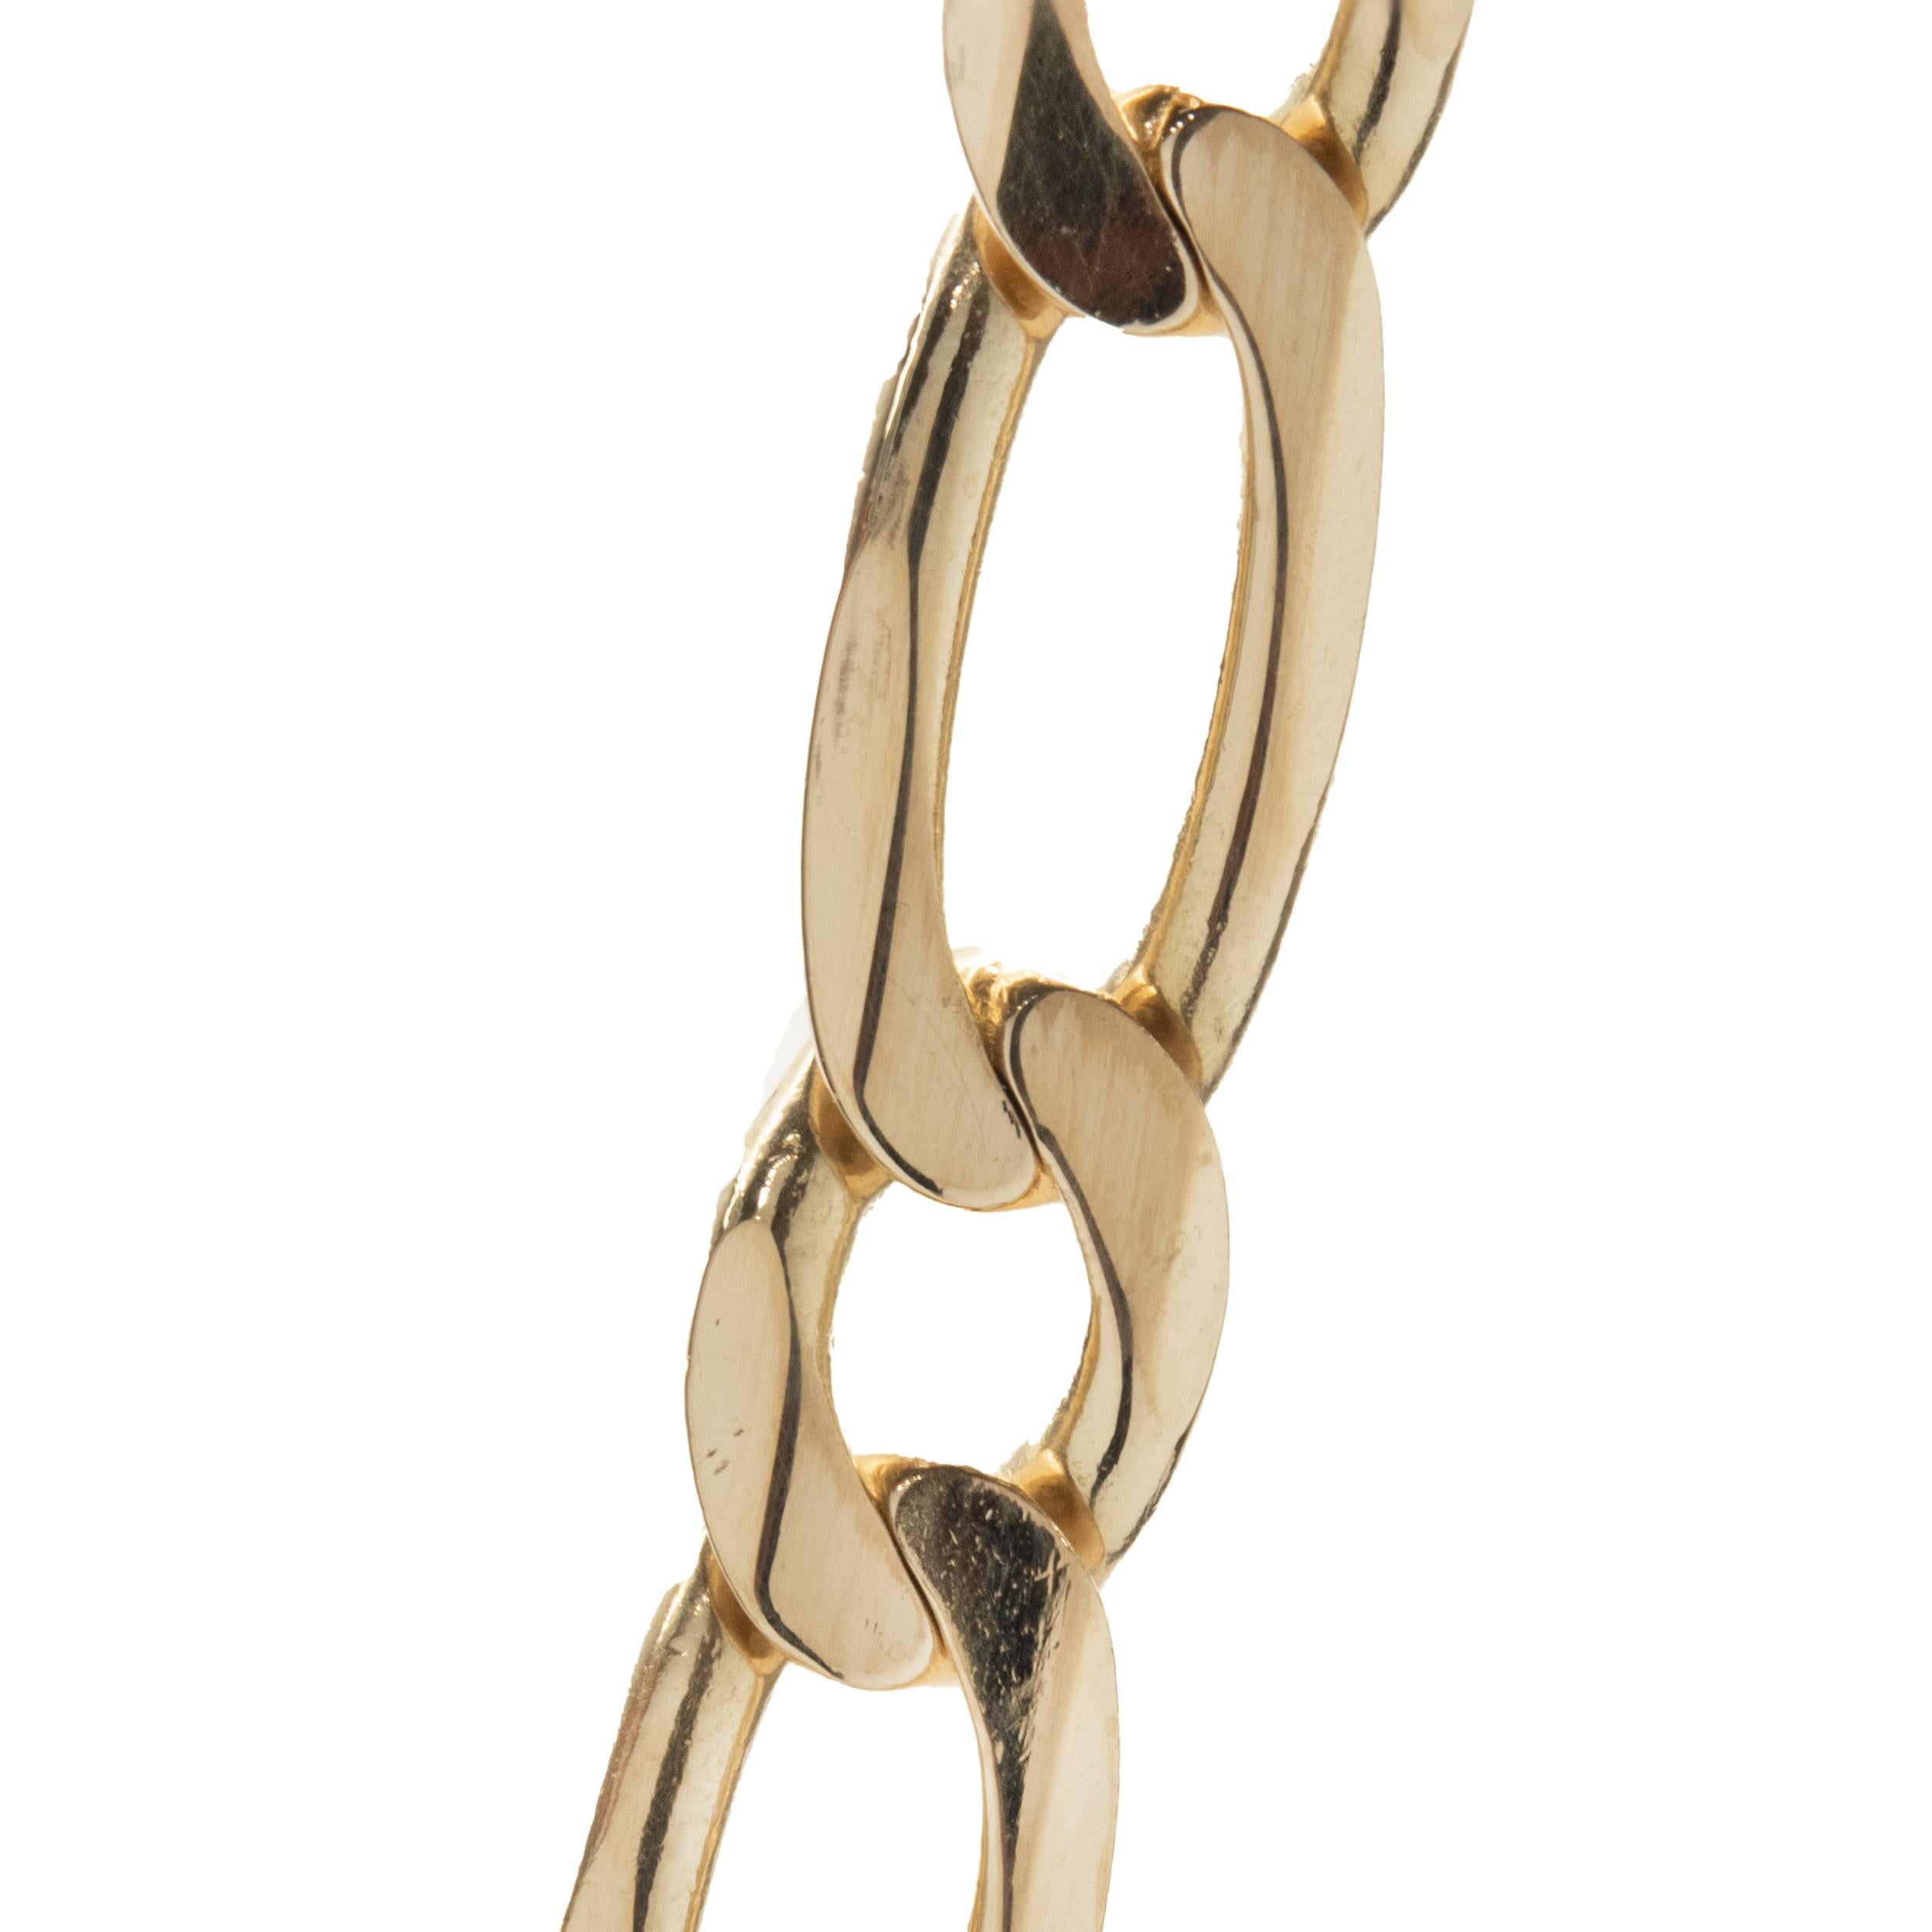 Material: 14K yellow gold
Dimensions: chain measures 19-inches in length, 6.5mm wide
Weight: 34.60 grams
